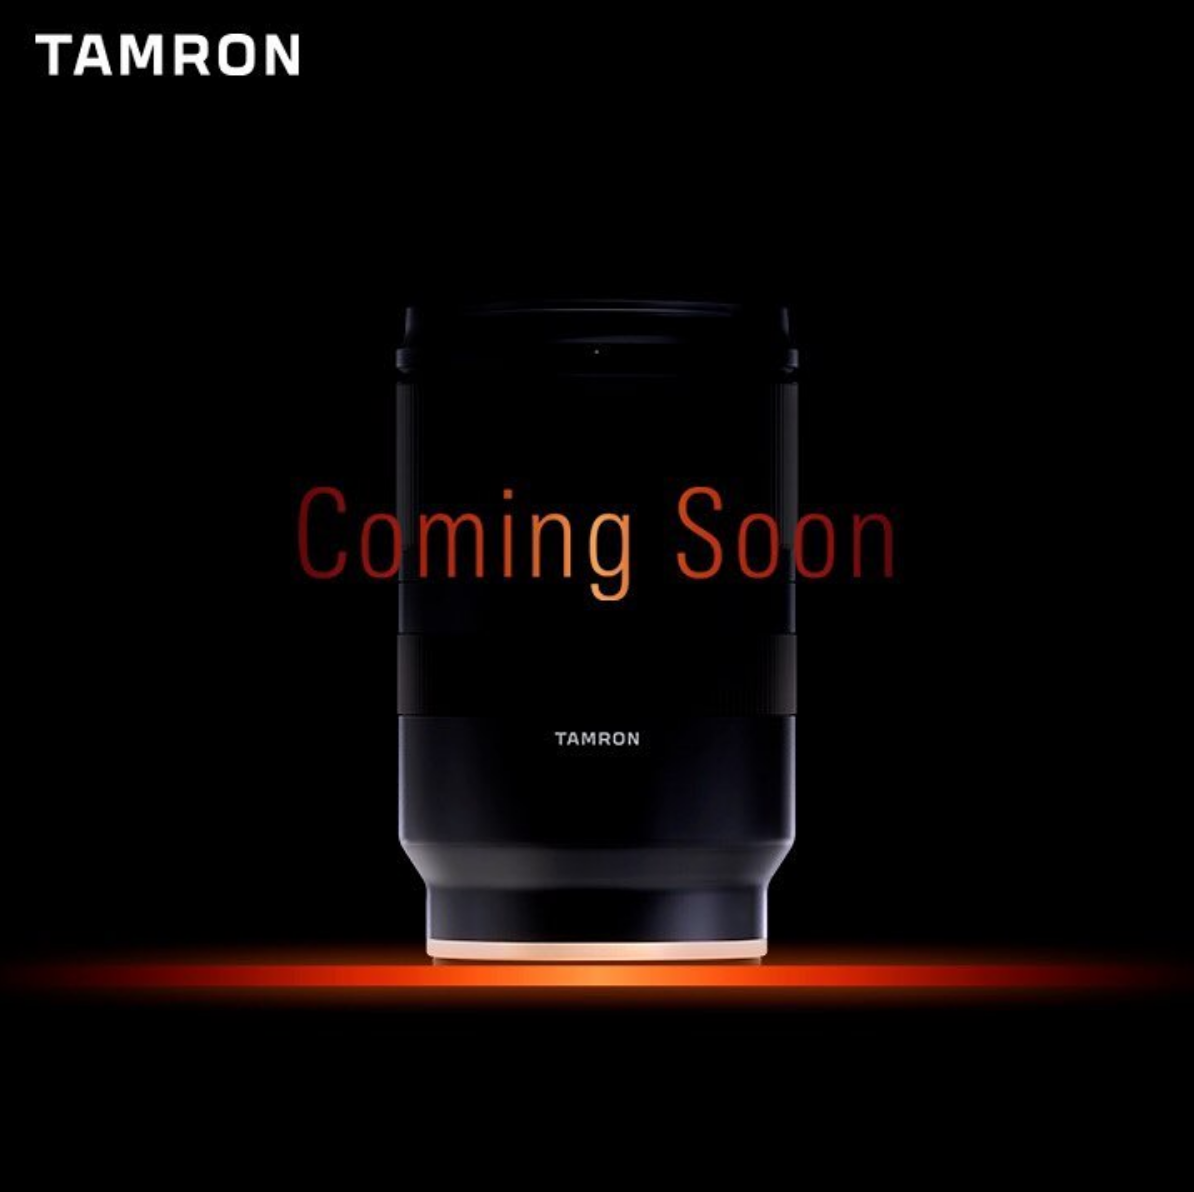 UPDATE: Tamron teases a new lens…is it a new 28-75mm F/2.8 FE?